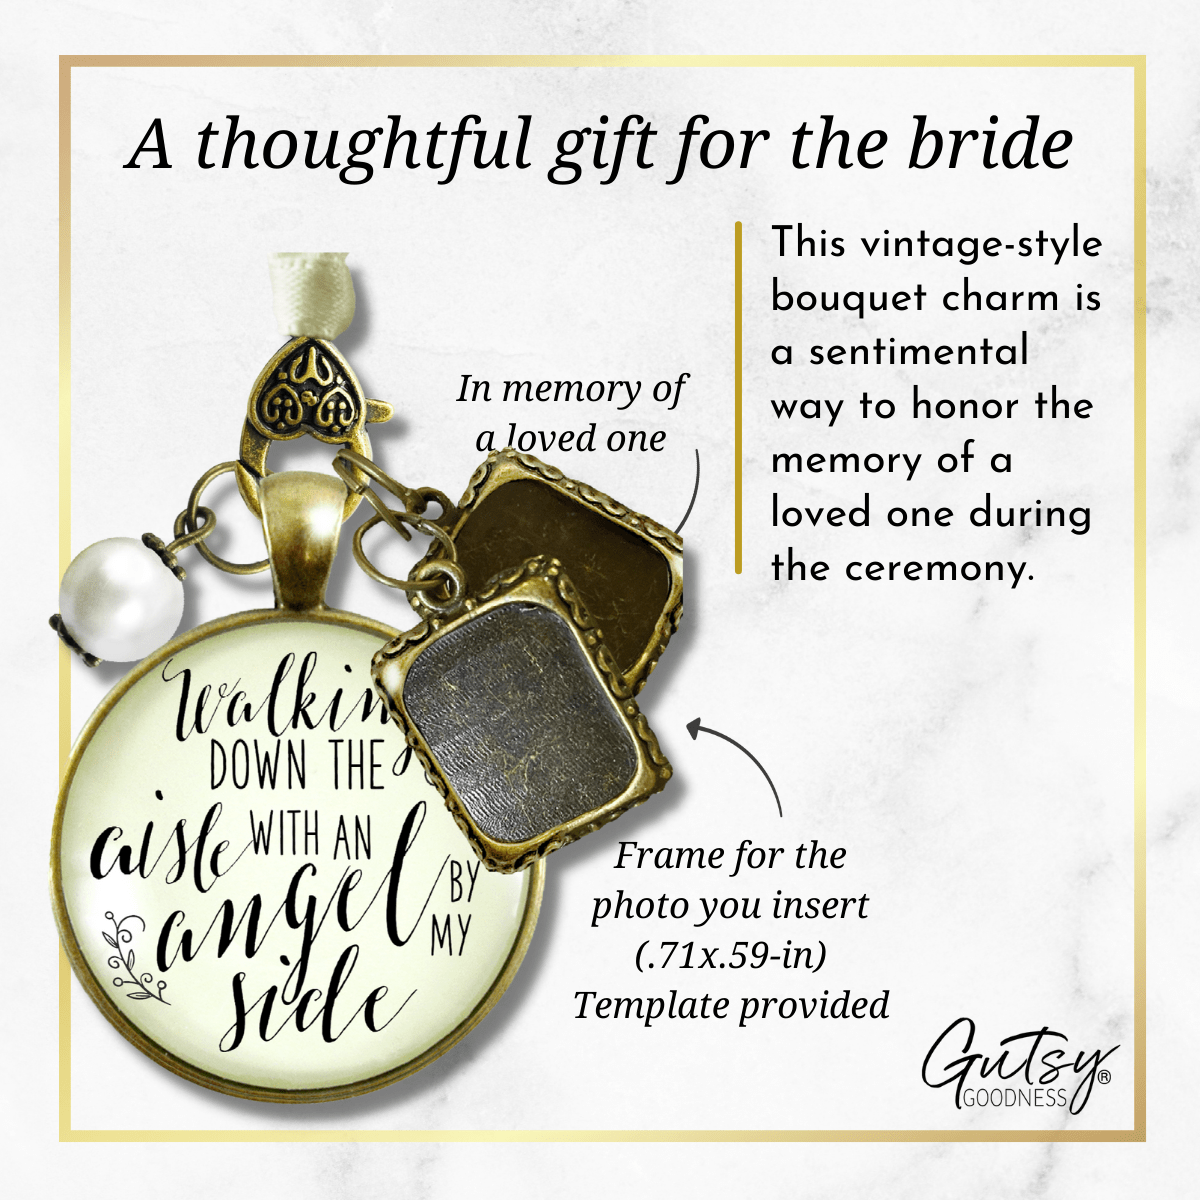 Walking Down The Aisle With An Angel By My Side - BRONZE - CREAM - WHITE BEAD - 2 FRAMES